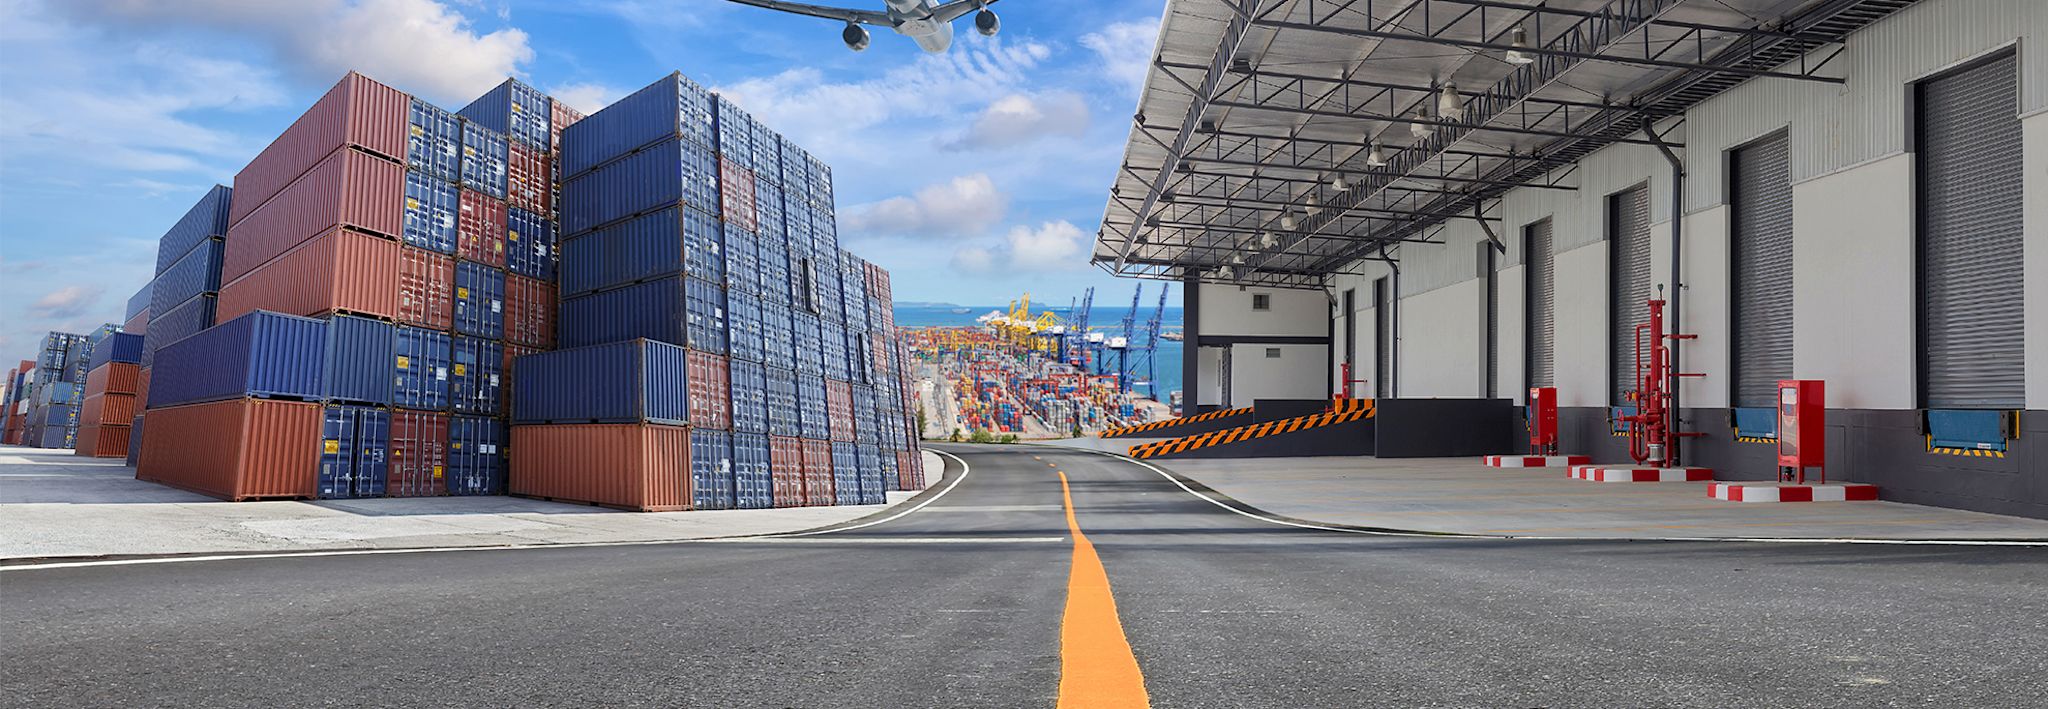 A supply chain facility has a warehouse, shipping containers, and a distribution center.